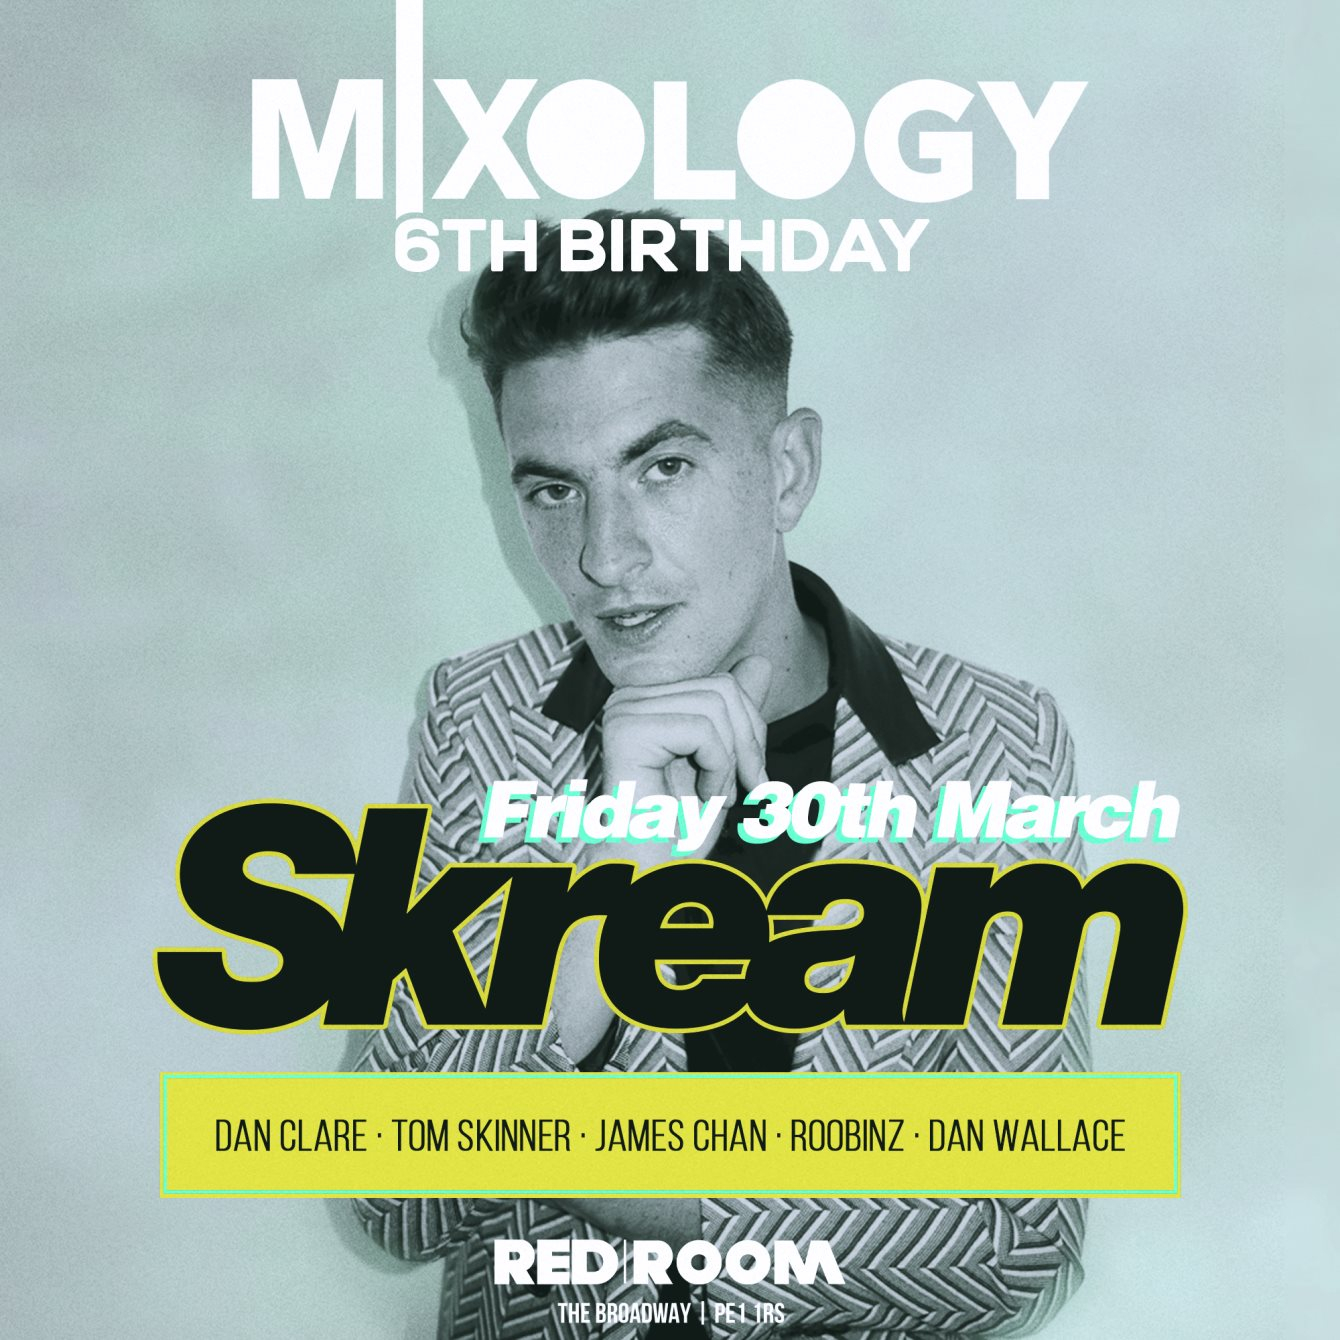 MIXOLOGY 6th Birthday with Skream - Flyer front